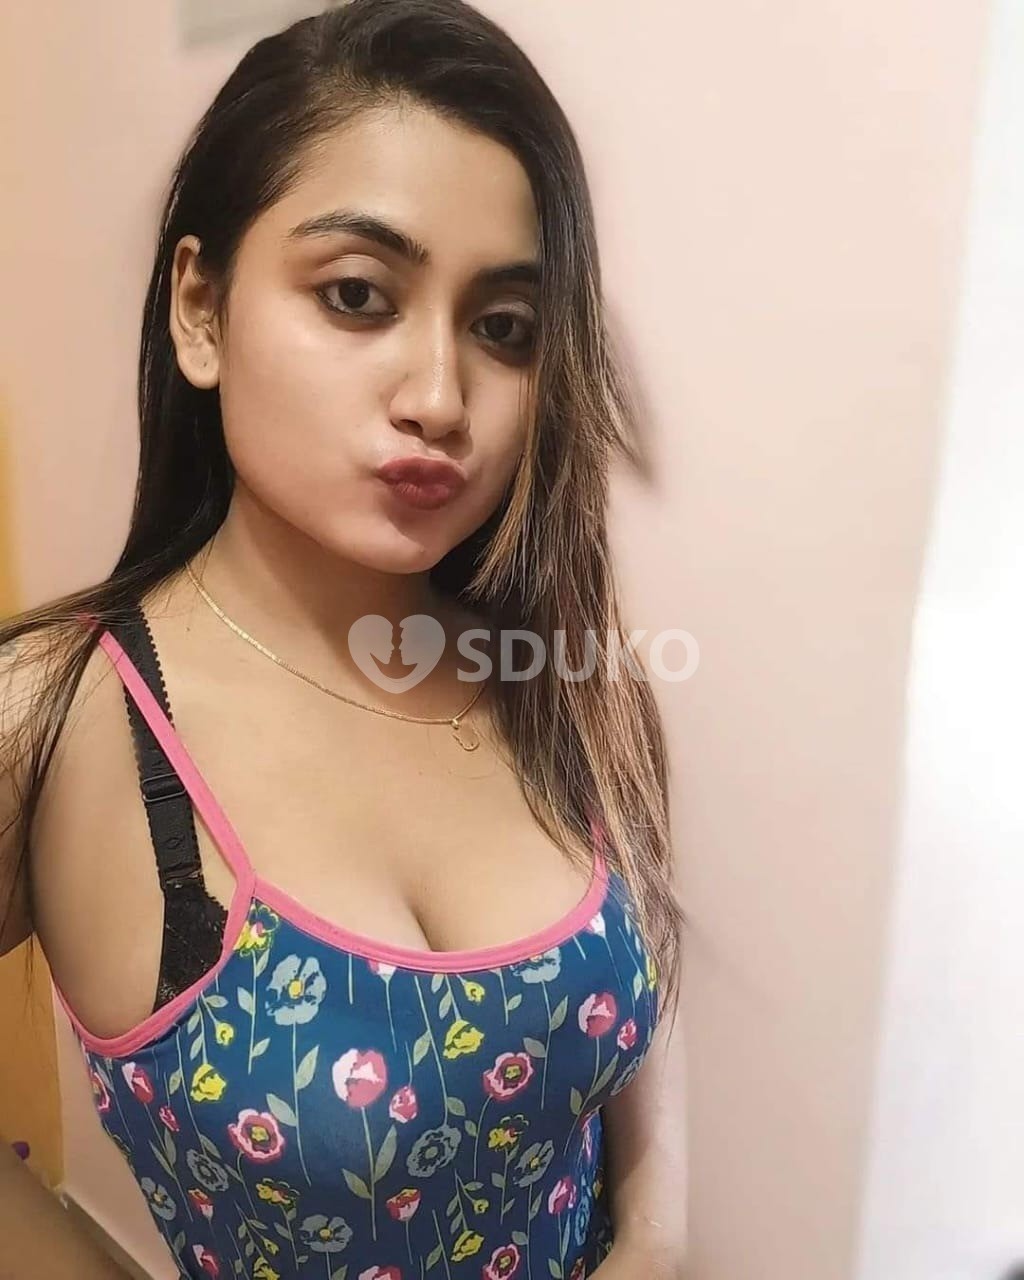 Gurgaon ❣️❣️Low price high profile college girl and aunty available any time available service genuine vip call 